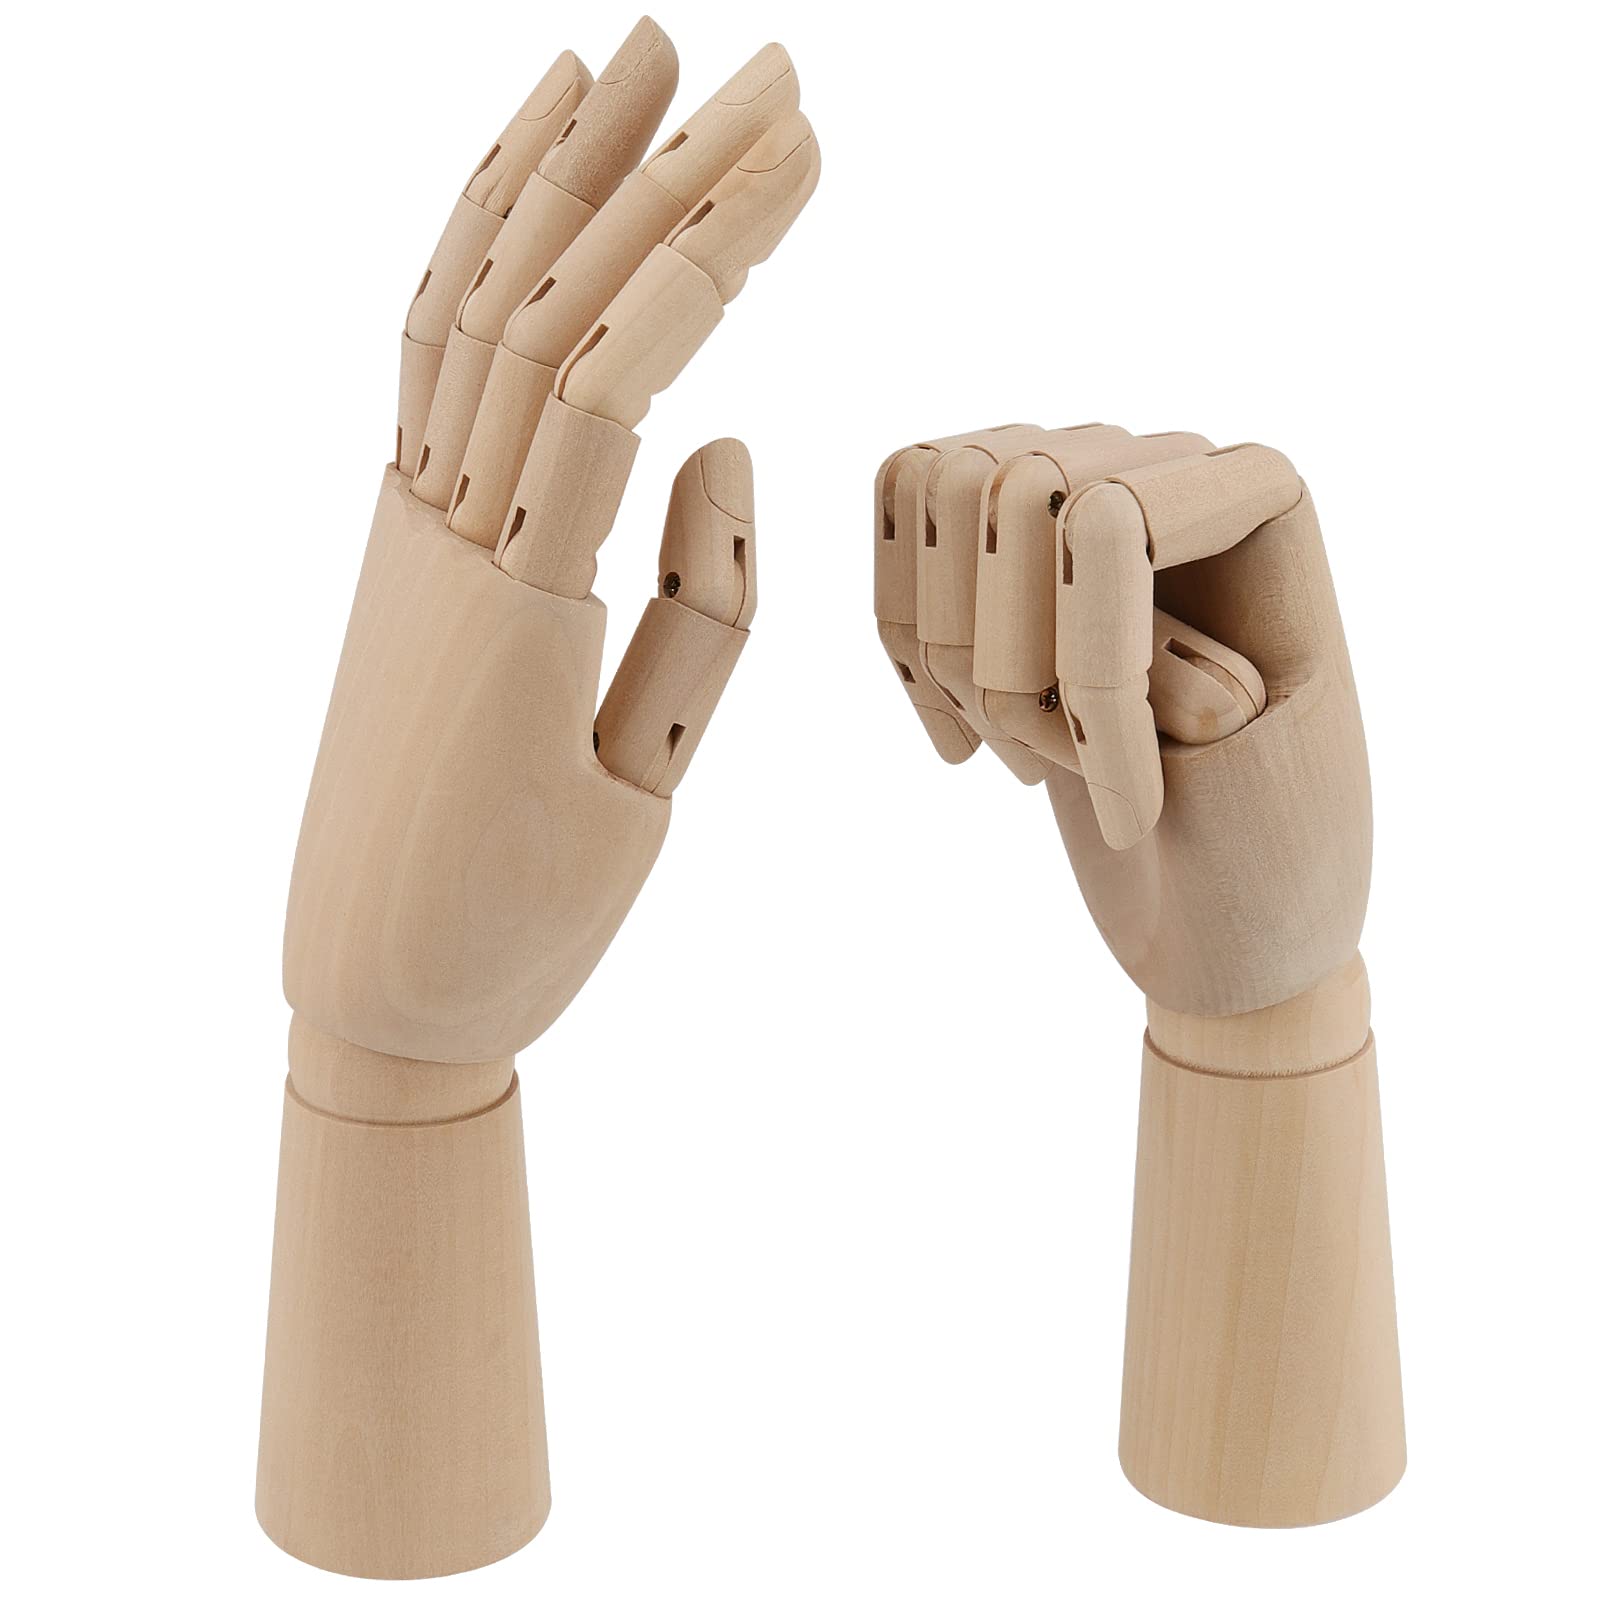 JEUIHAU 2 PCS 12 Inches Wooden Hand Model, Left and Right Wood Art Mannequin  Hand, Flexible Wooden Manikin Hand with Moveable Fingers, for Students,  Artists Sketching, Painting